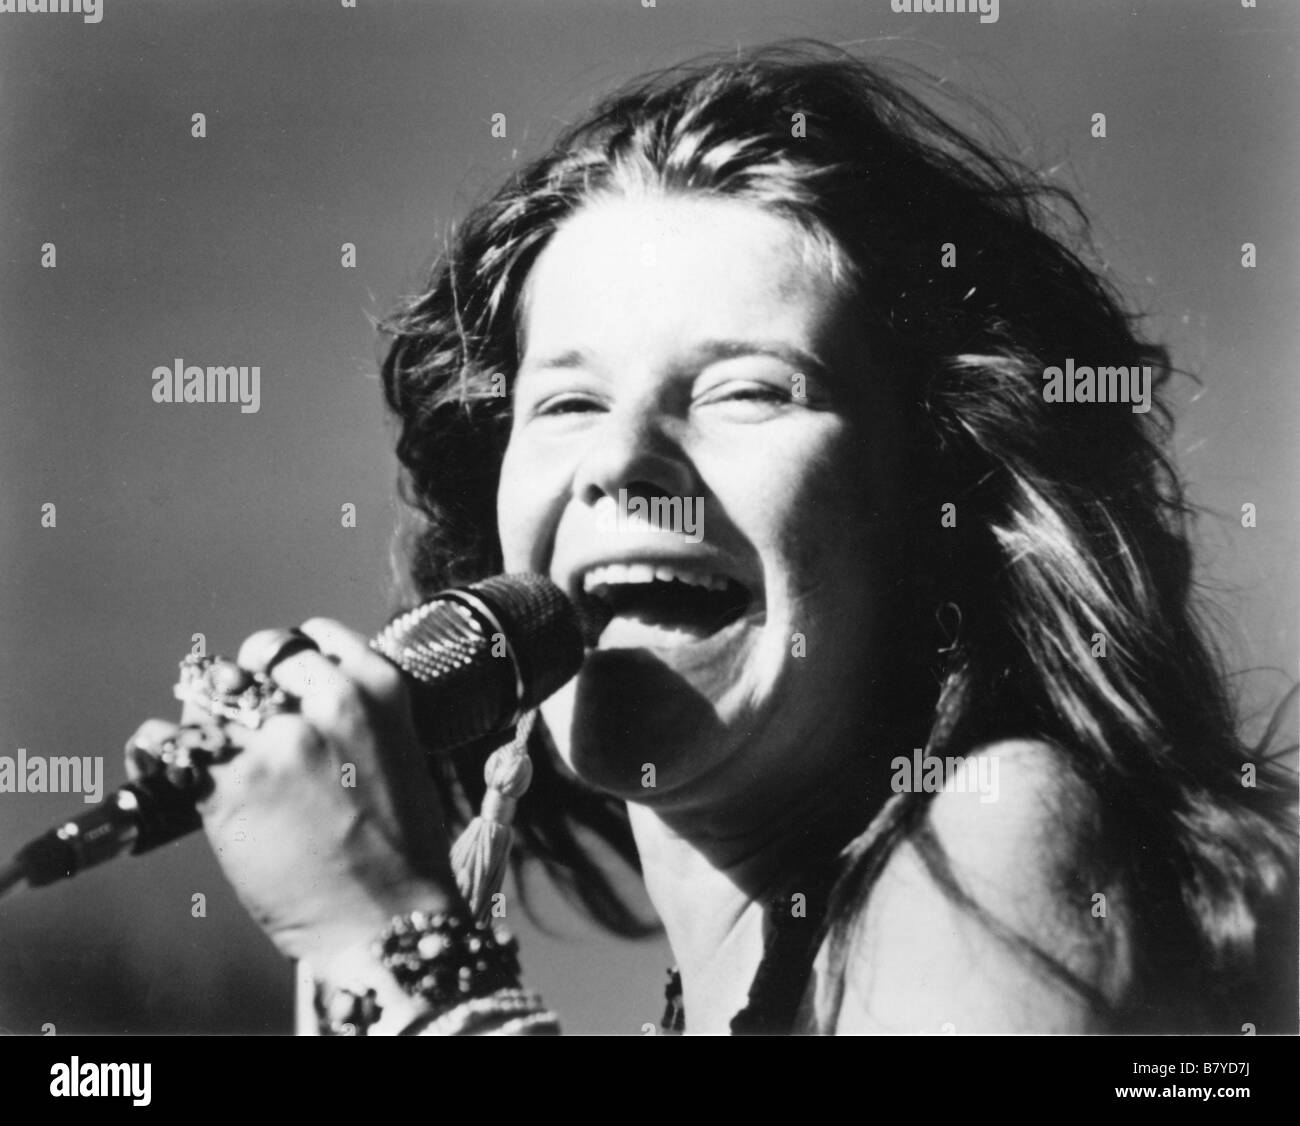 Chanter Black and White Stock Photos & Images - Alamy